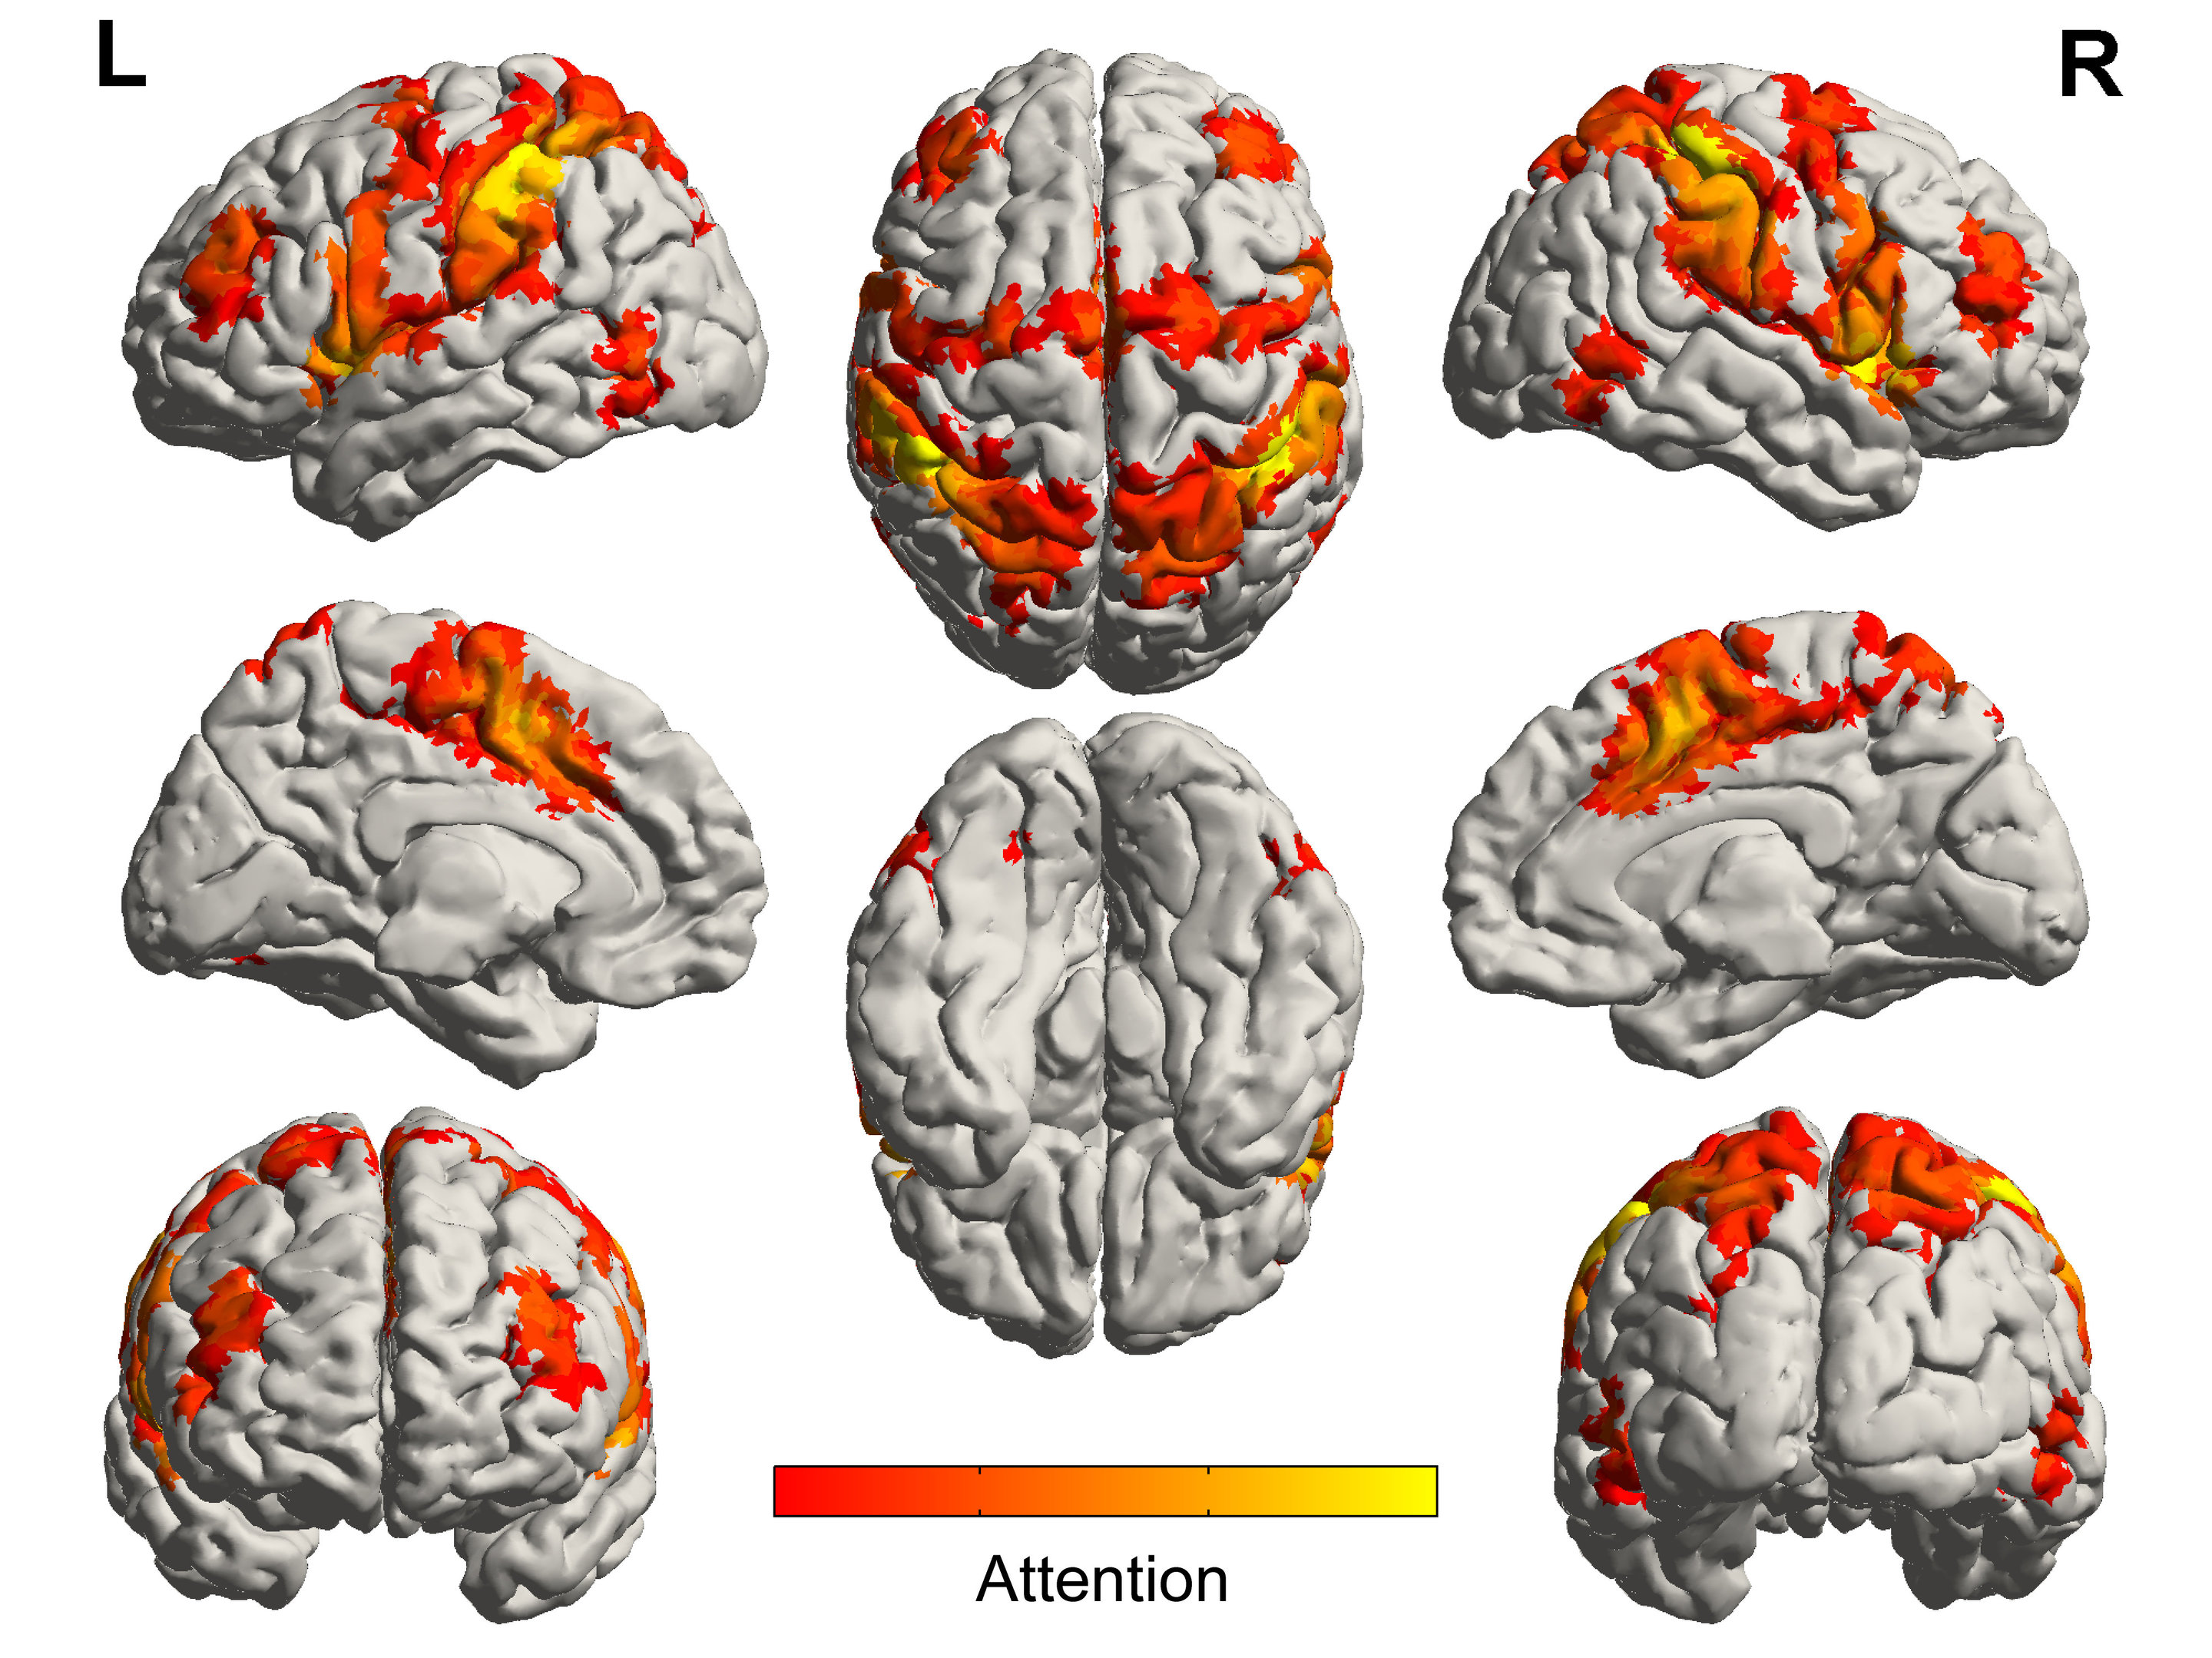 Music activates regions of the brain spared by Alzheimer's disease